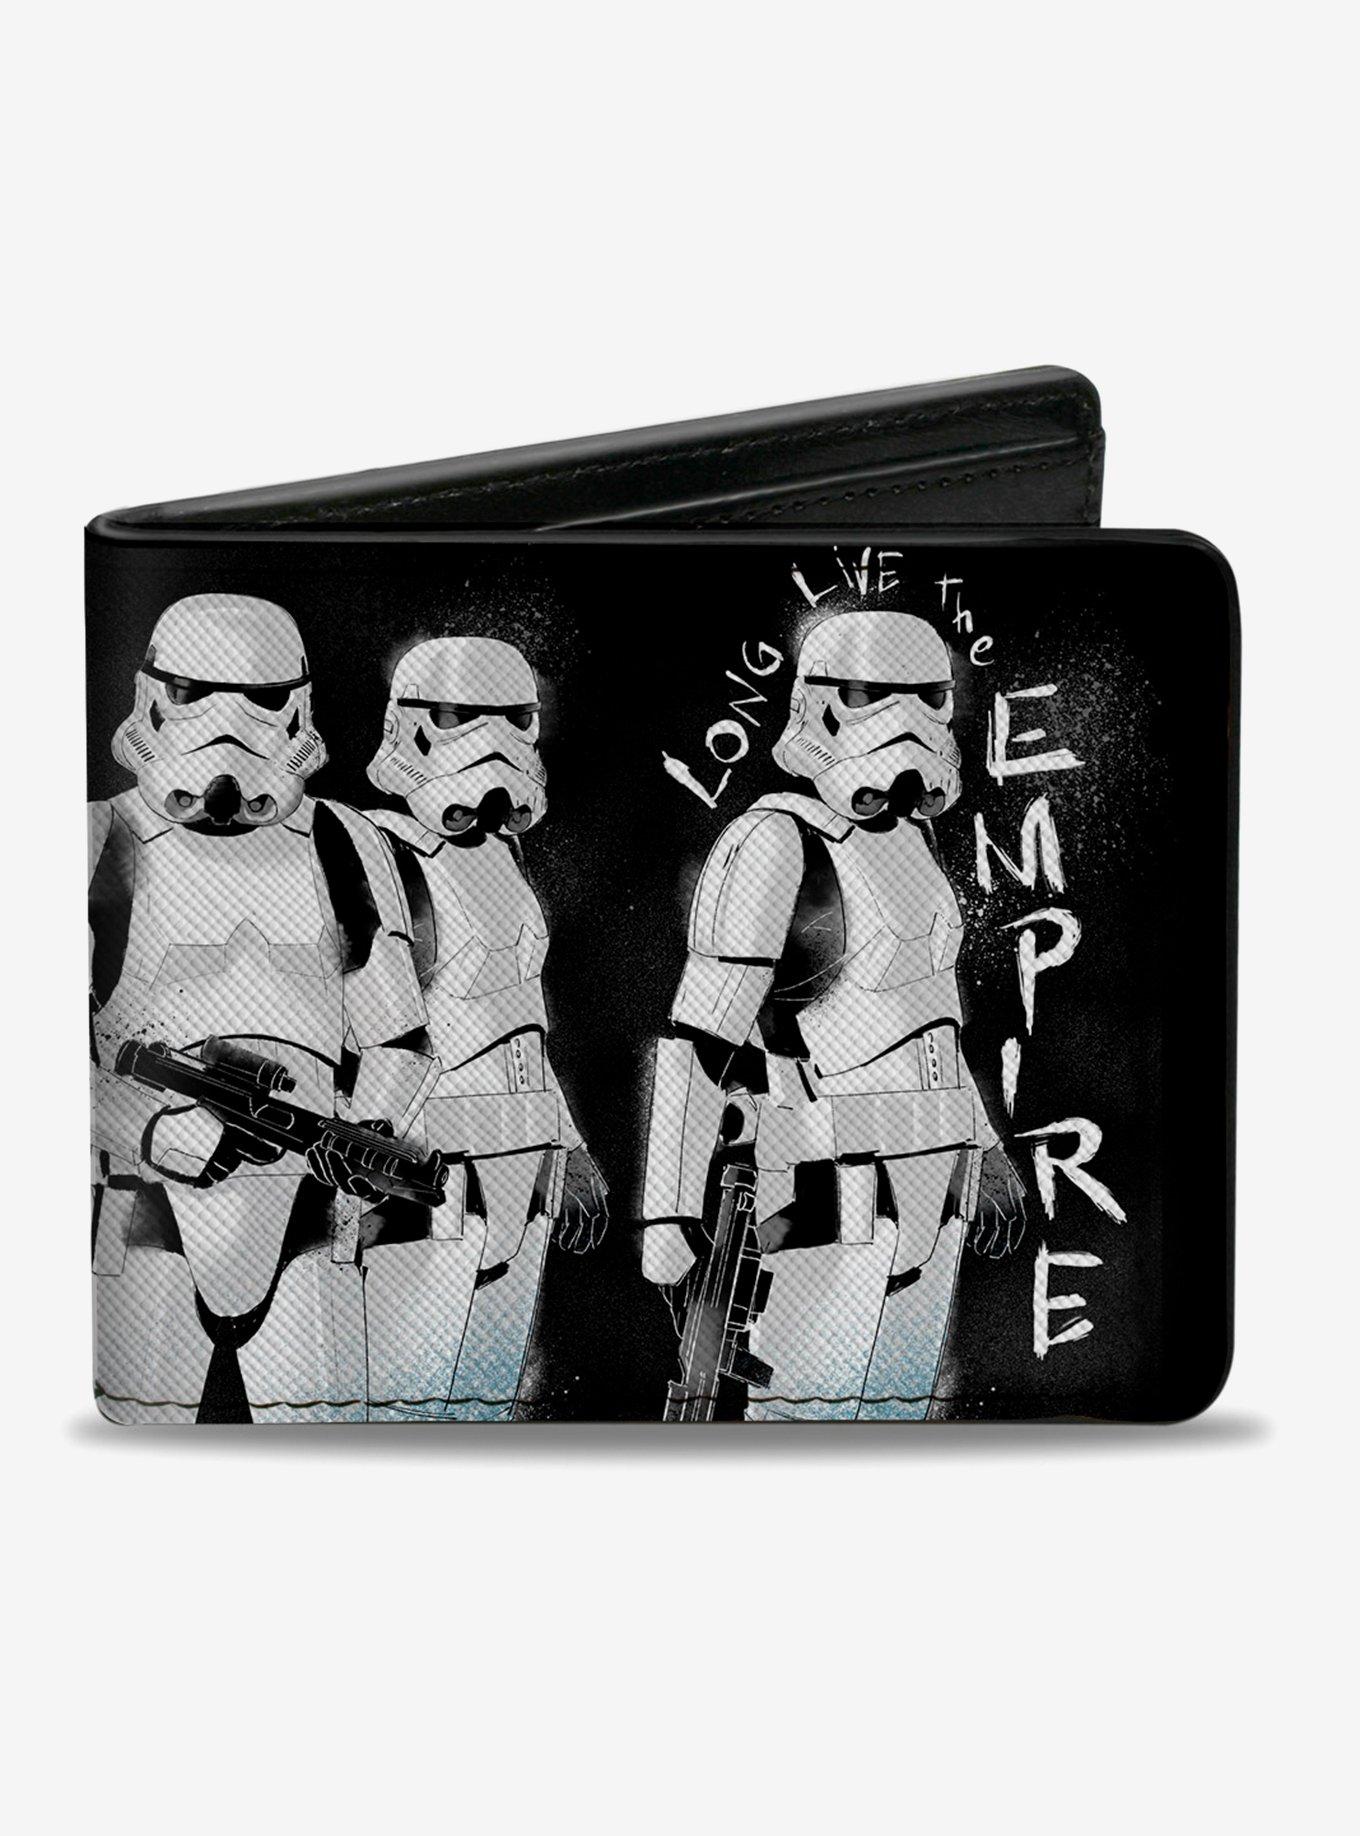 OFFICIAL STAR WARS STORM TROOPER SHOOTING GALACTIC EMPIRE WHITE WALLET NEW 